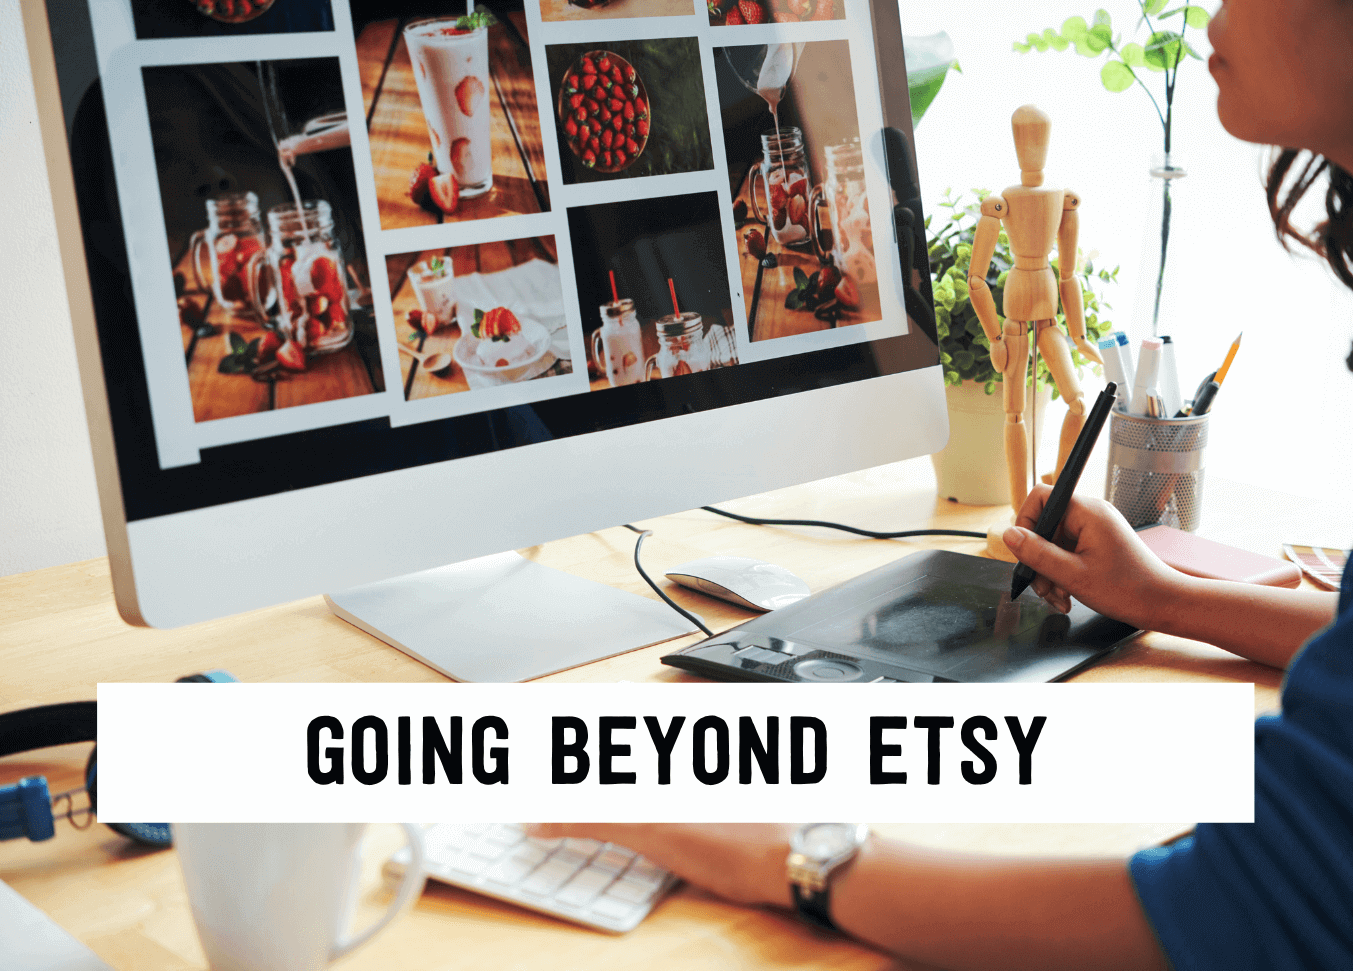 Going beyond etsy | Tizzit.co - start and grow a successful handmade business